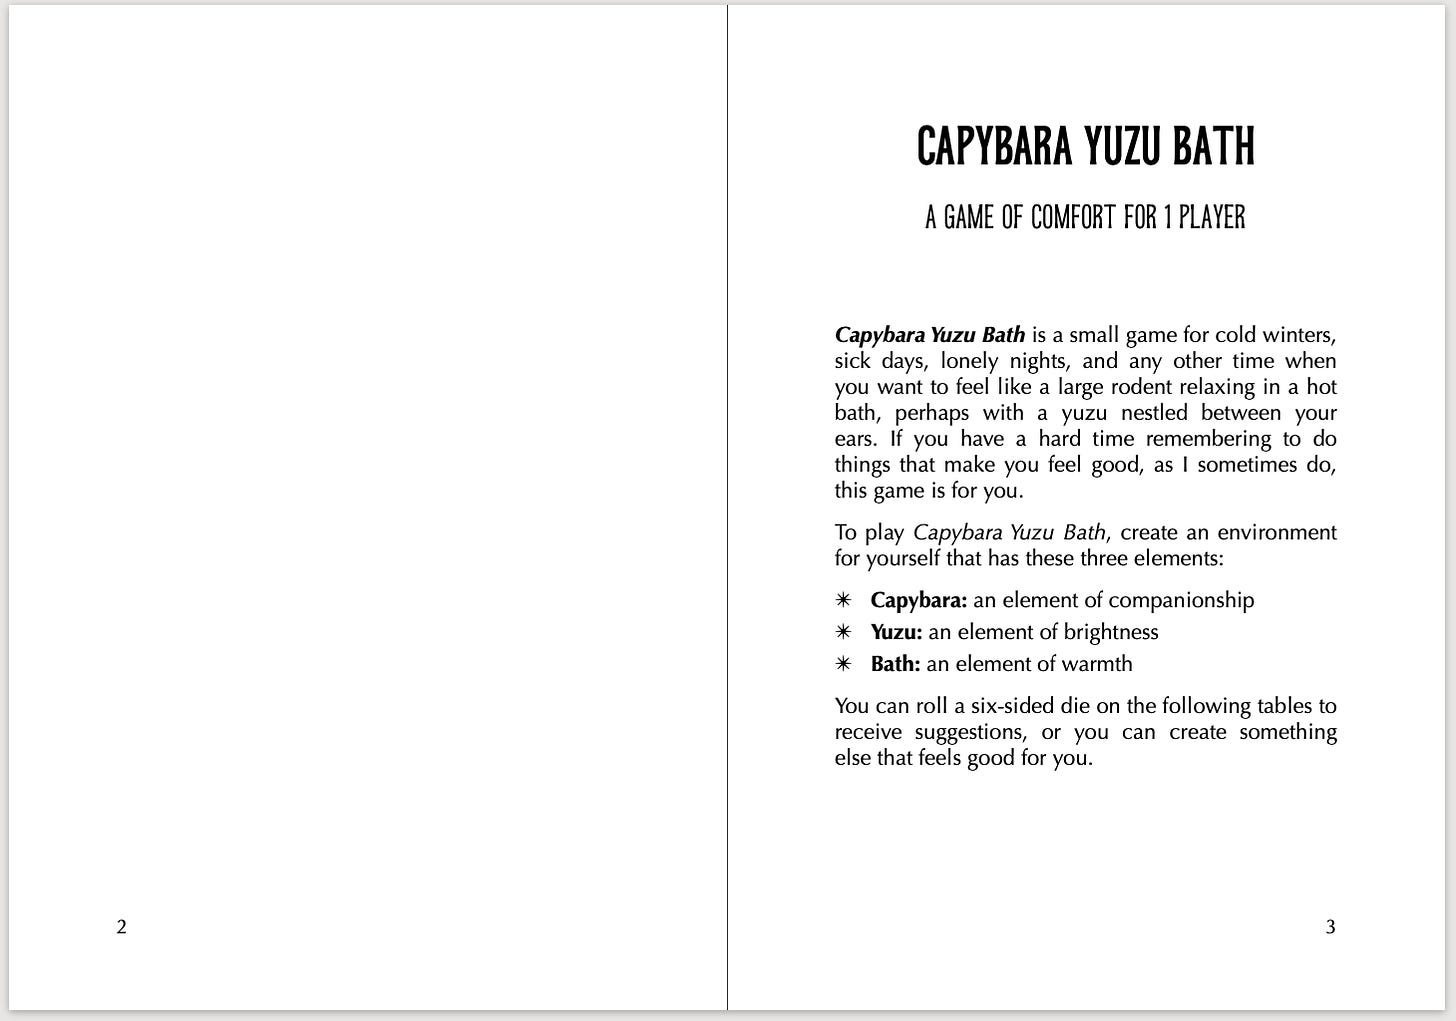 The same first page spread of Capybara Yuzu Bath. There is no art, and the pages are smaller. The text is only in black.